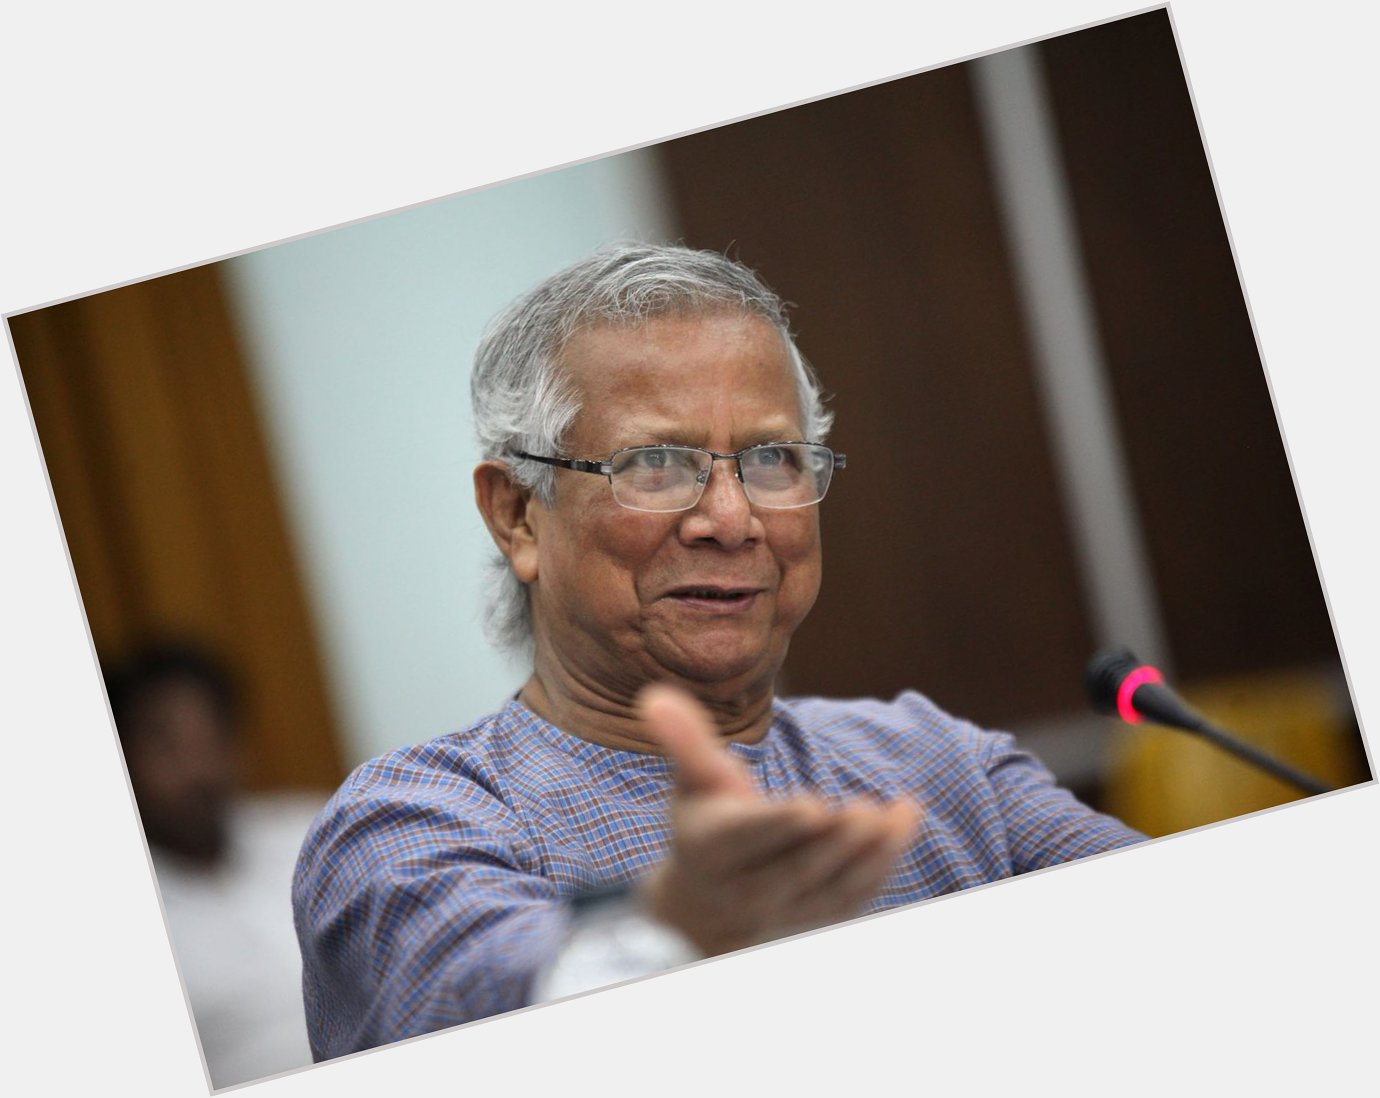  We can create a better world ... if only we want it Happy Birthday to Nobel Laureate Professor Muhammad Yunus. 